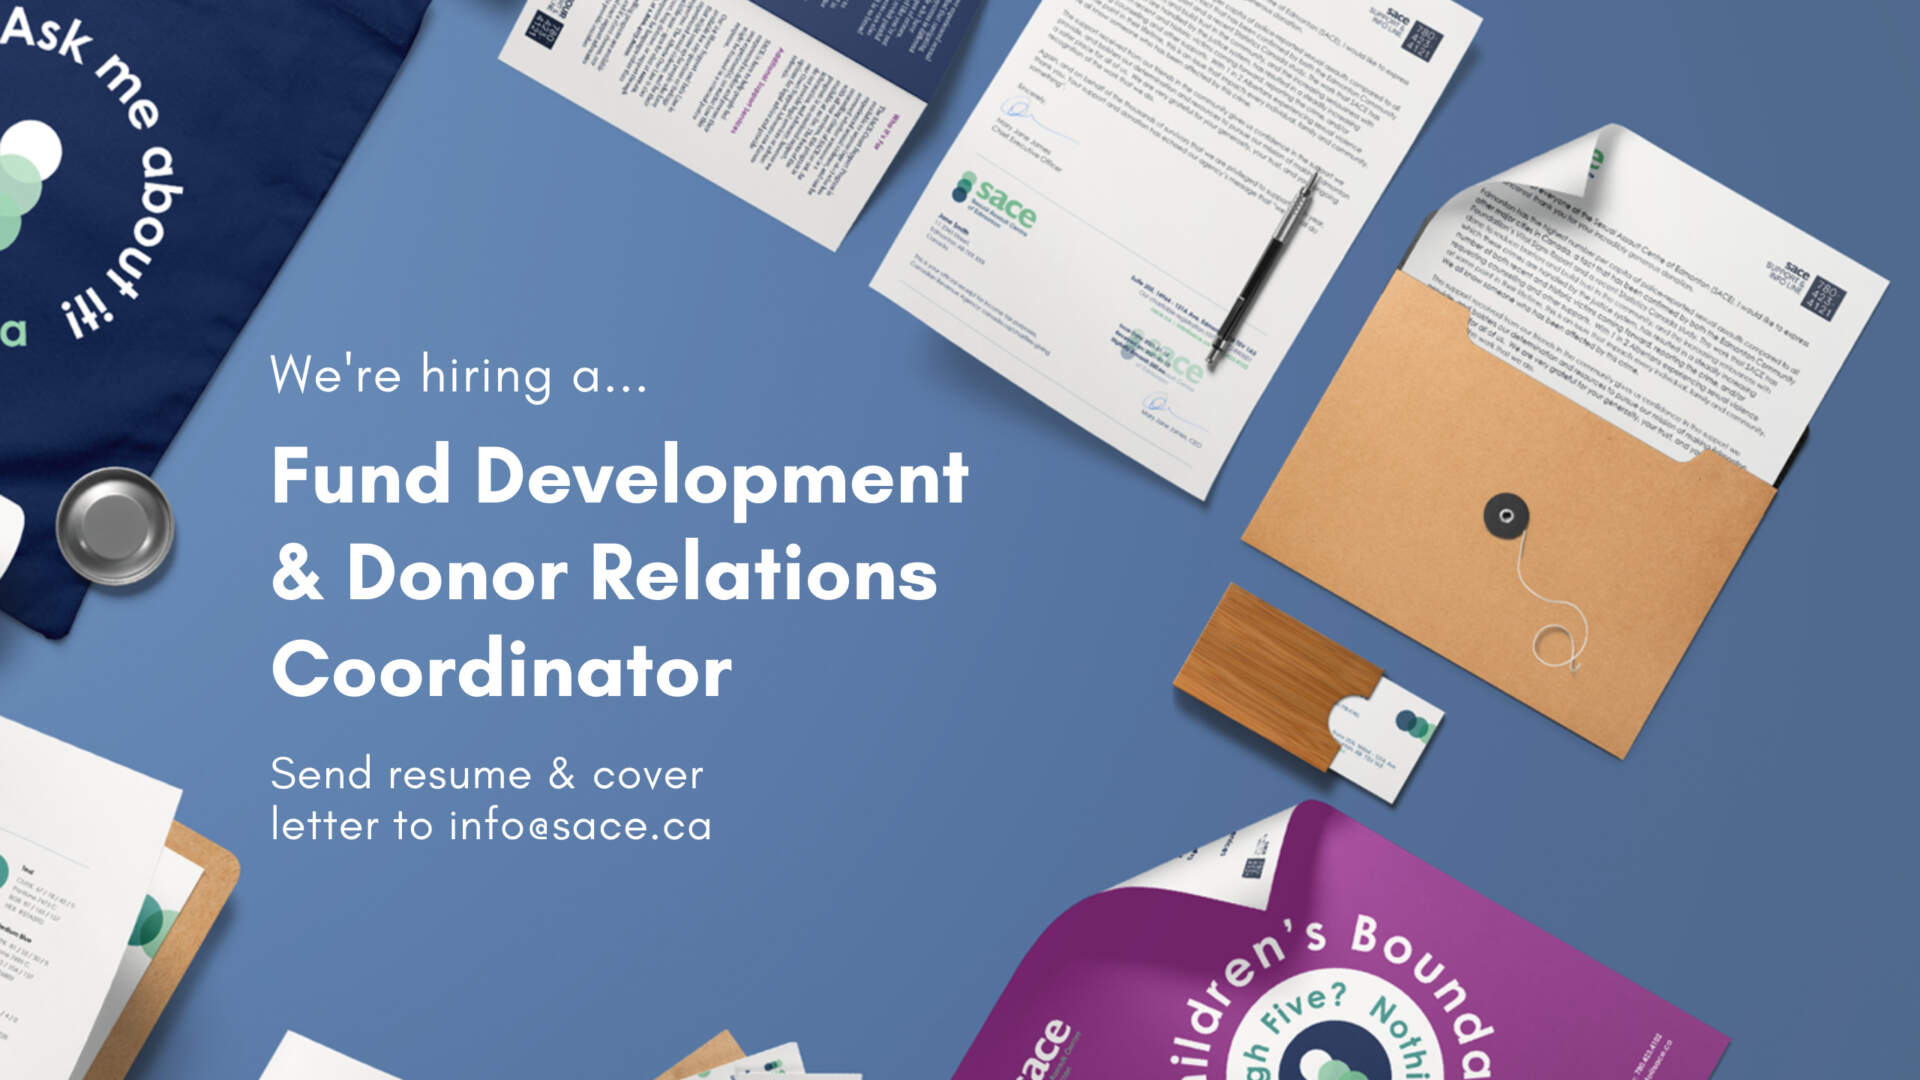 Blue background with paper documents, SACE tote bag, SACE poster, business card, and pen with text that reads "We're hiring a Fund Development & Donor Relations Coordinator" and "Send resume & cover letter to info@sace.ca"